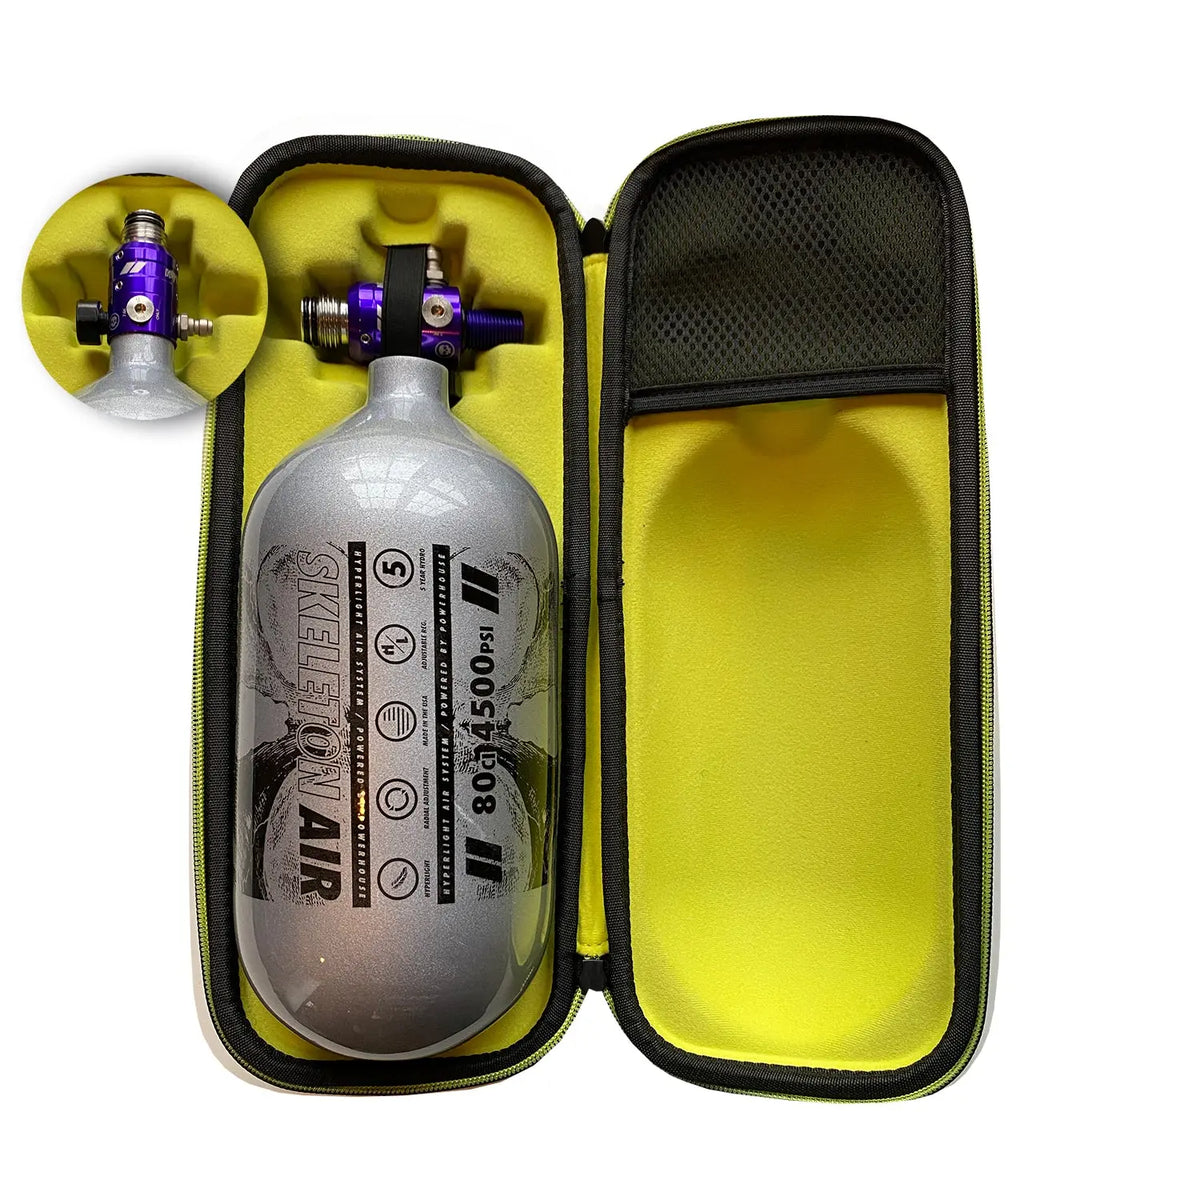 PRO DNA Universal Tank Case Infamous Paintball